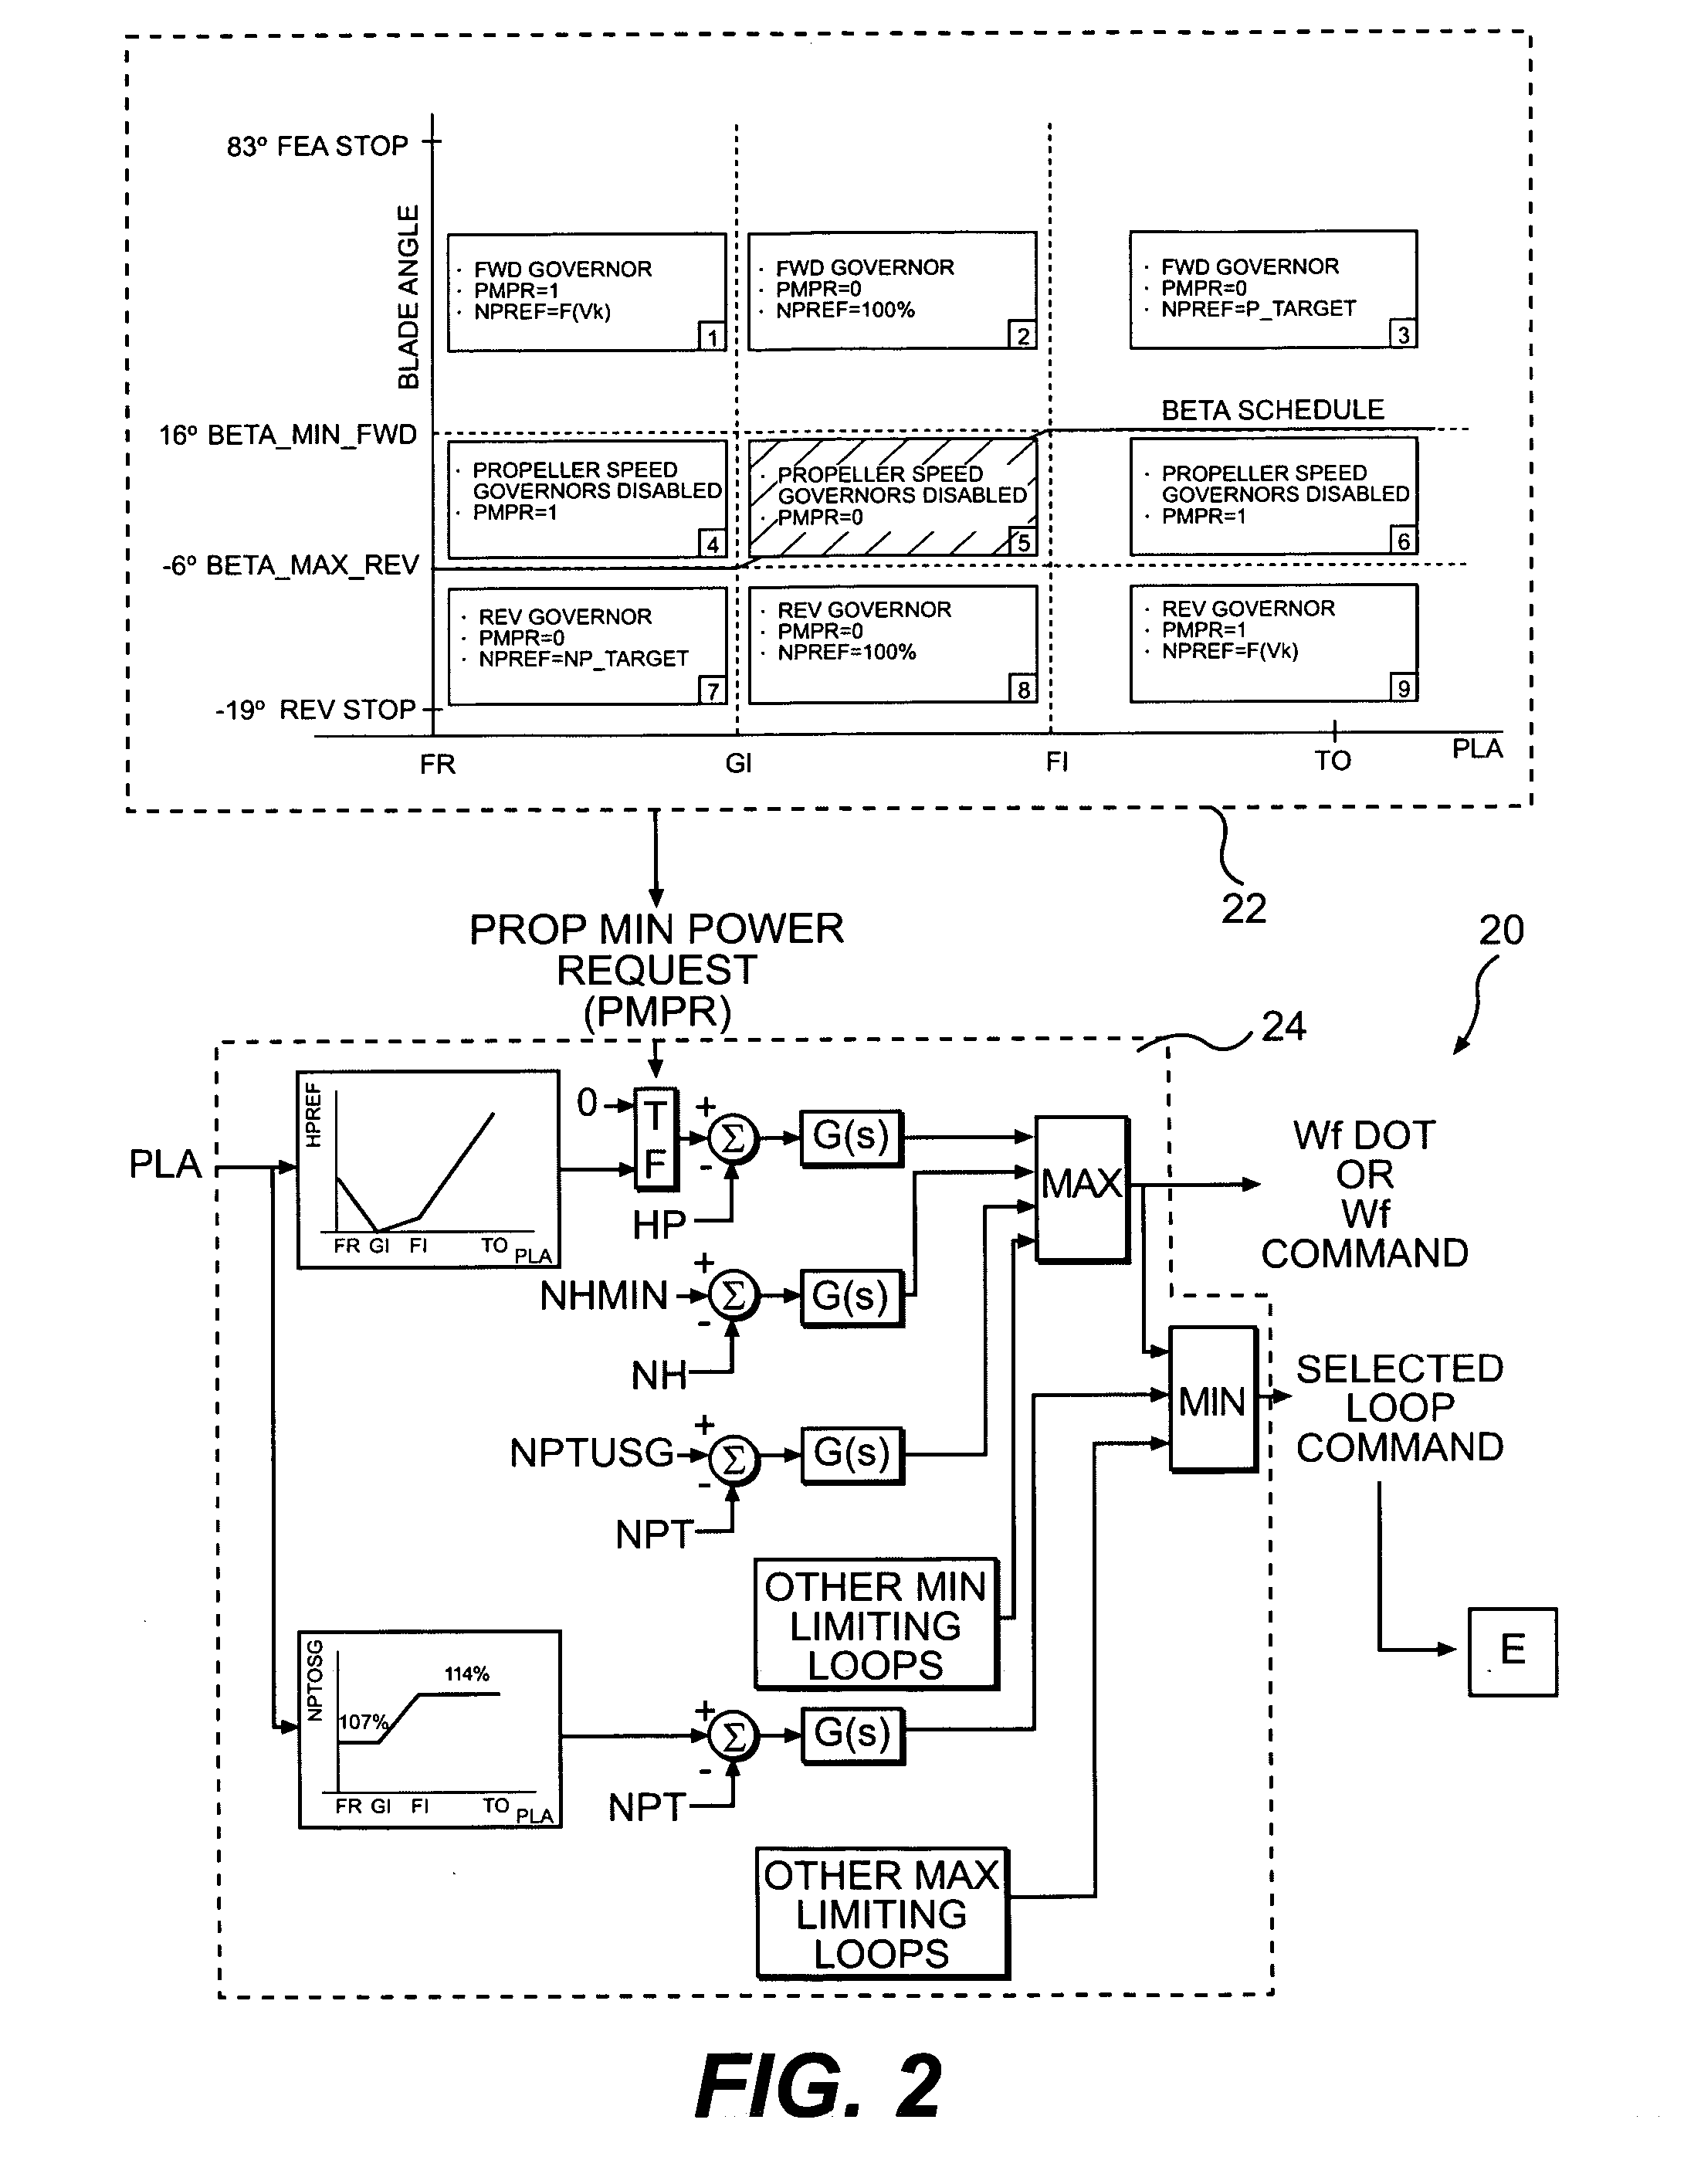 Control logic for a propeller system